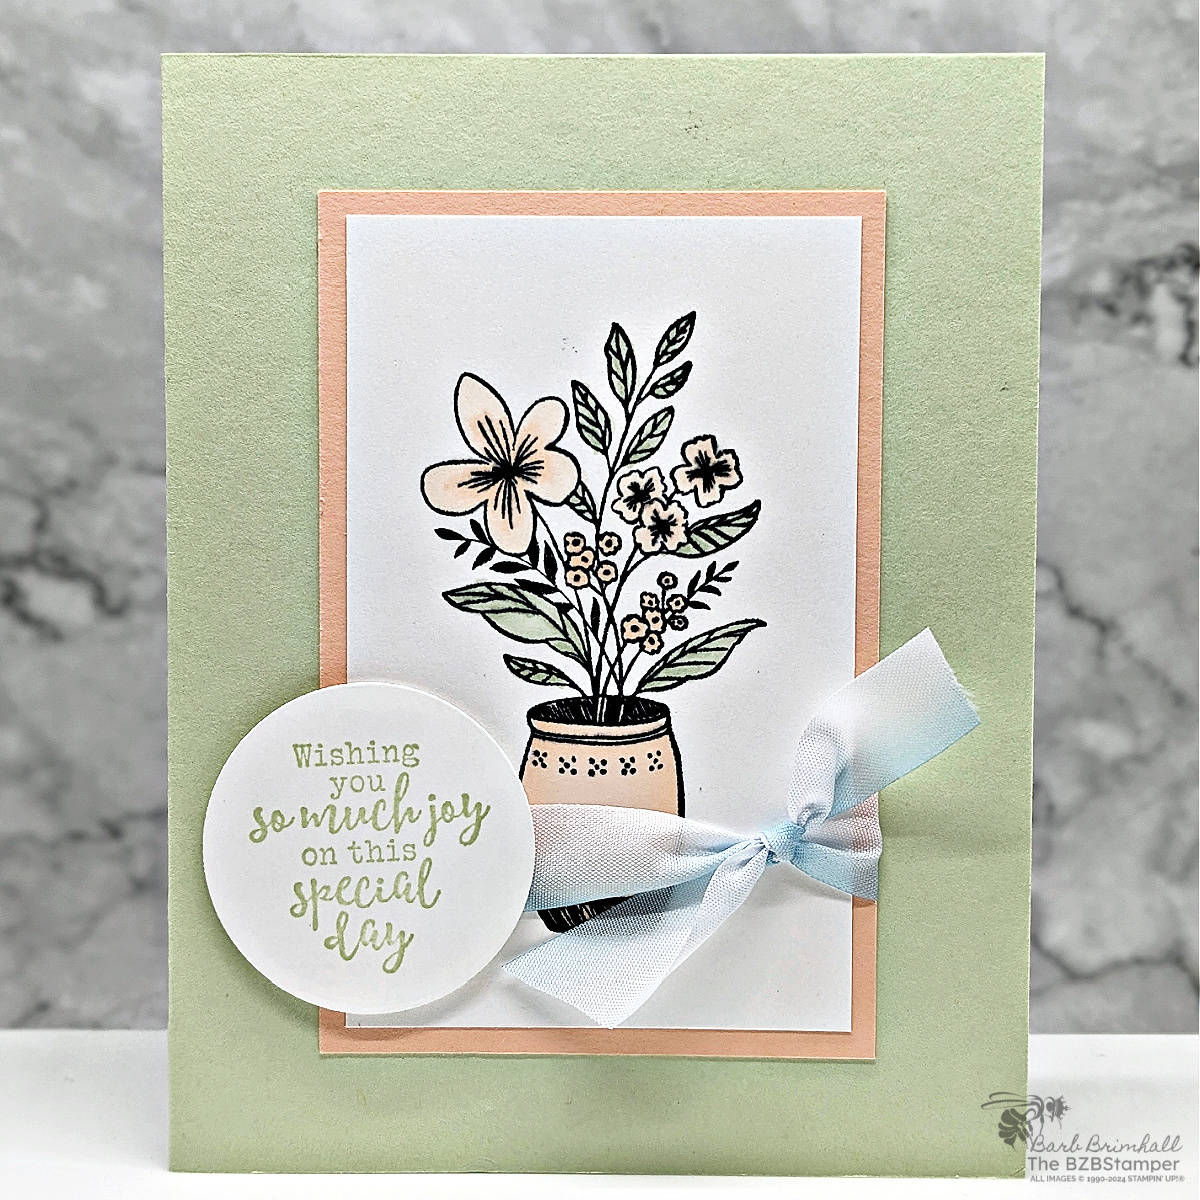 Handmade Card using the Everyday Details Stamp Set